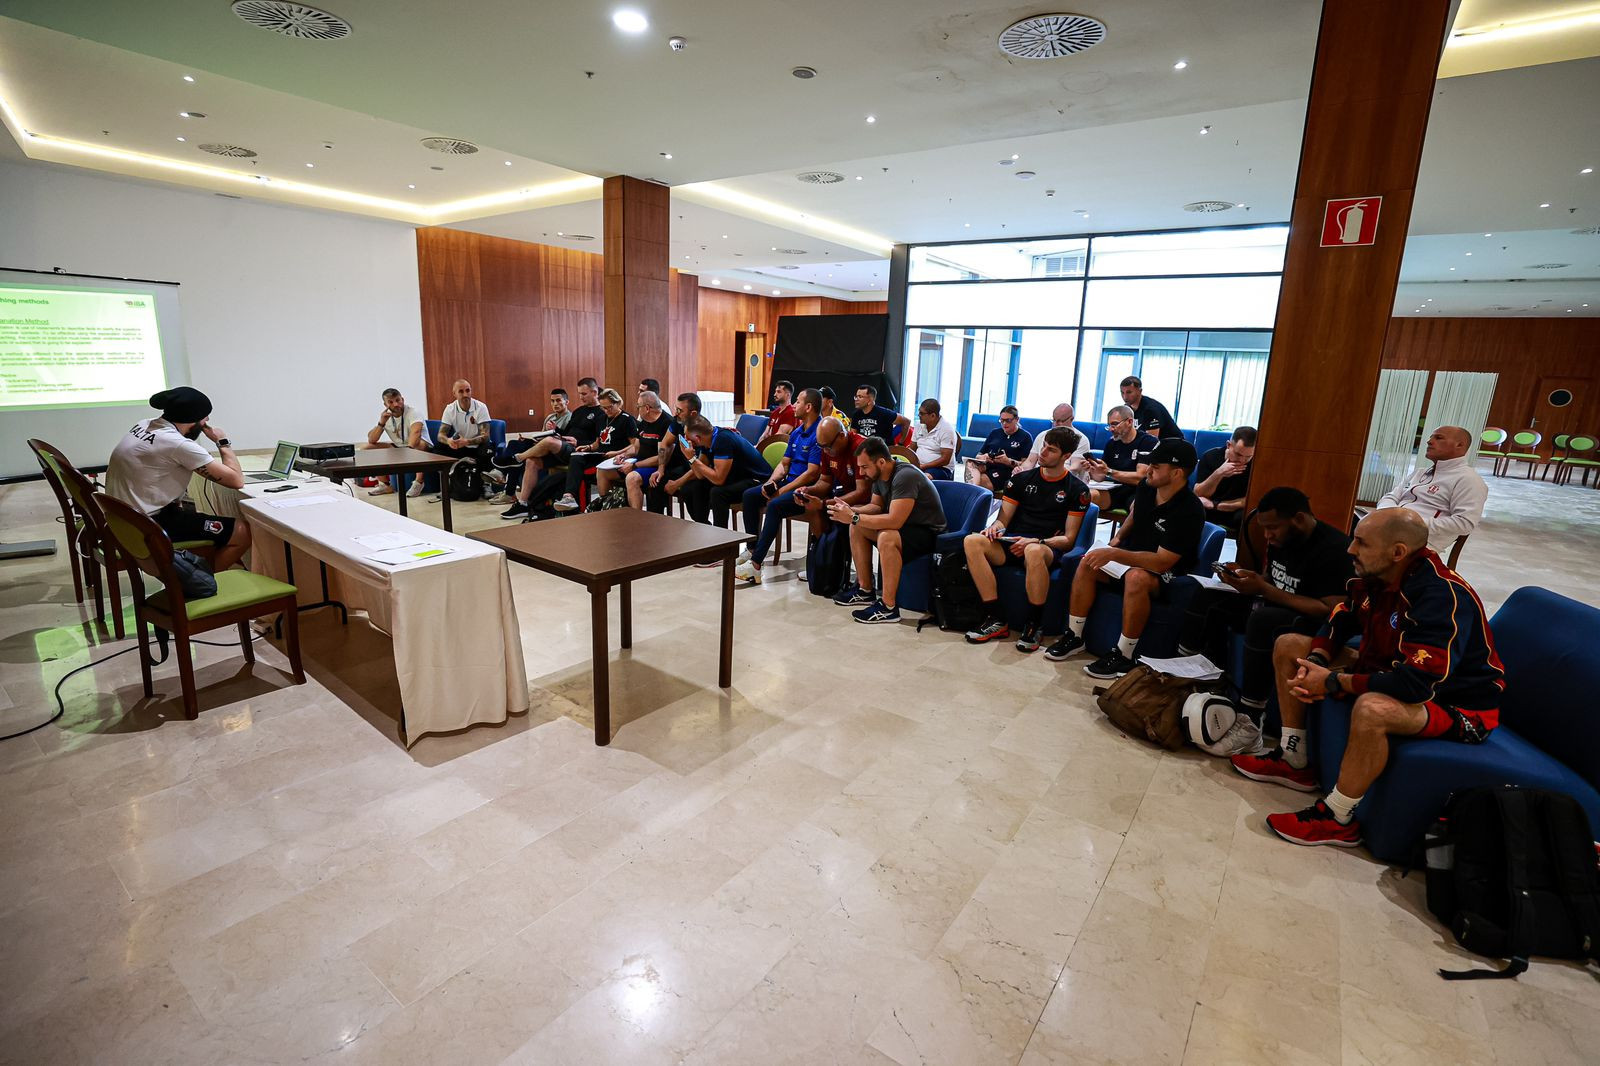 The IBA held a one-star coaching course in La Nucia this week ©IBA